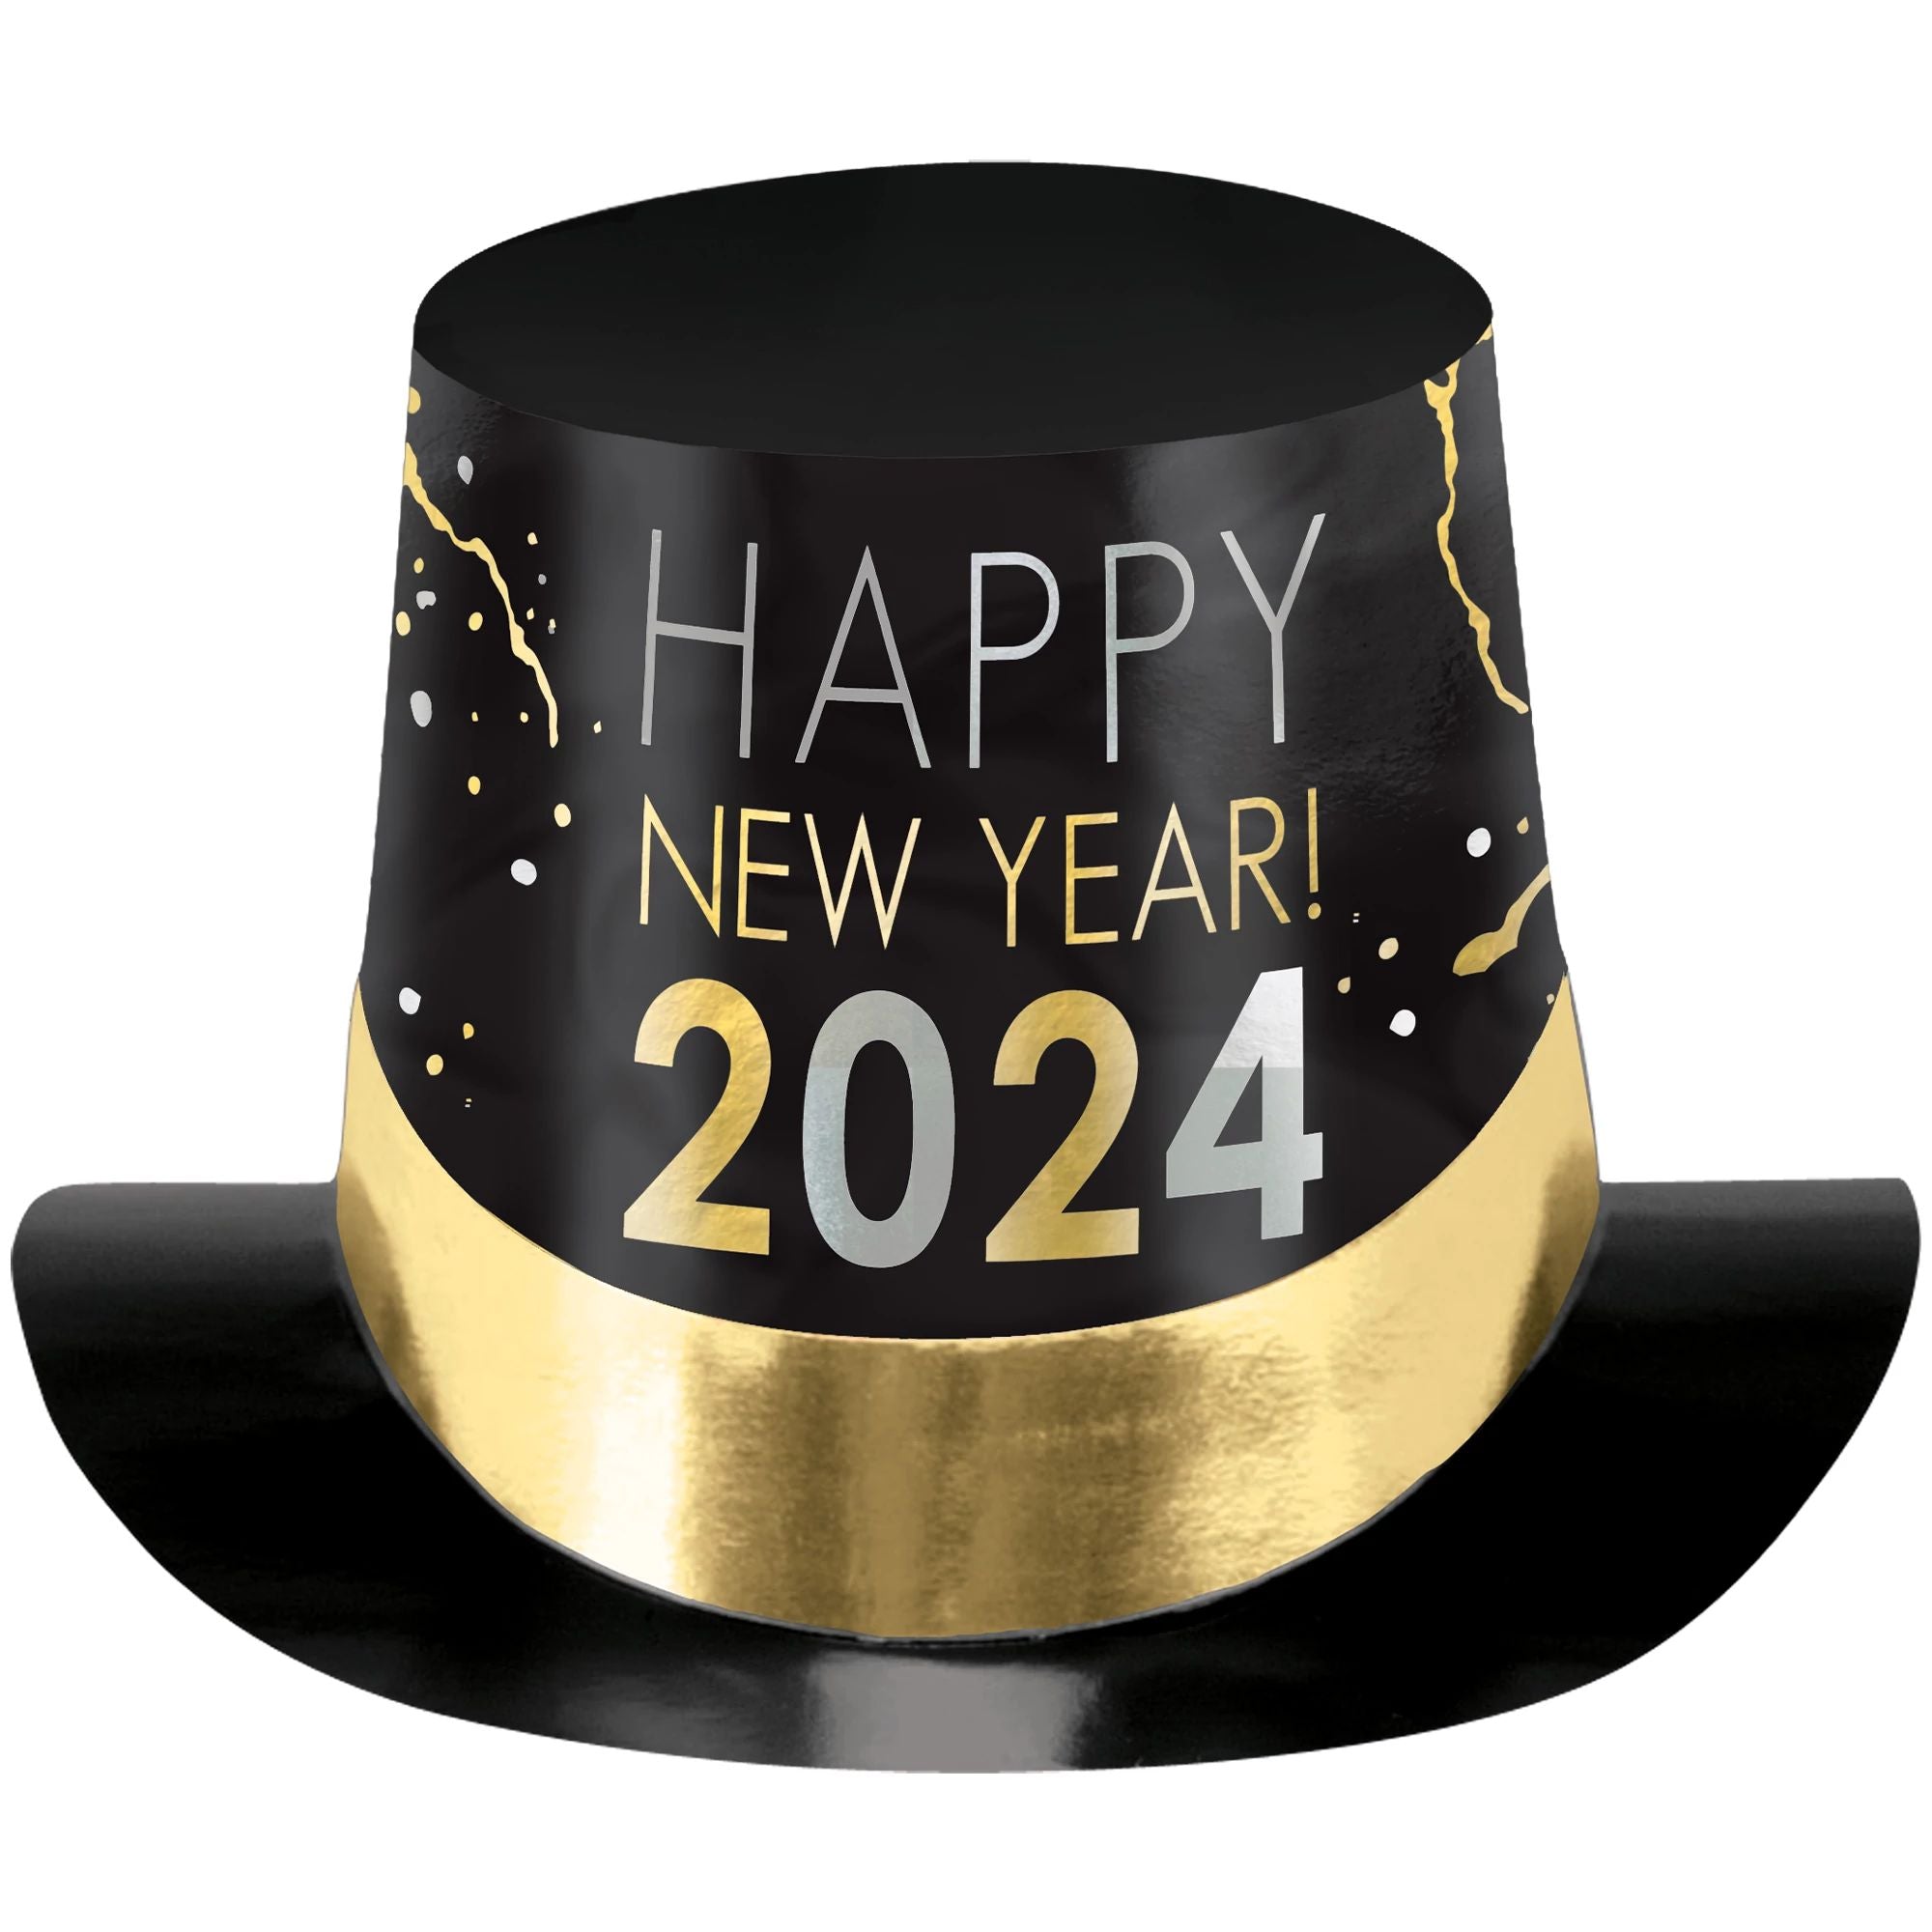 Amscan HOLIDAY: NEW YEAR'S 2024 Top Hat - Black, Silver, Gold